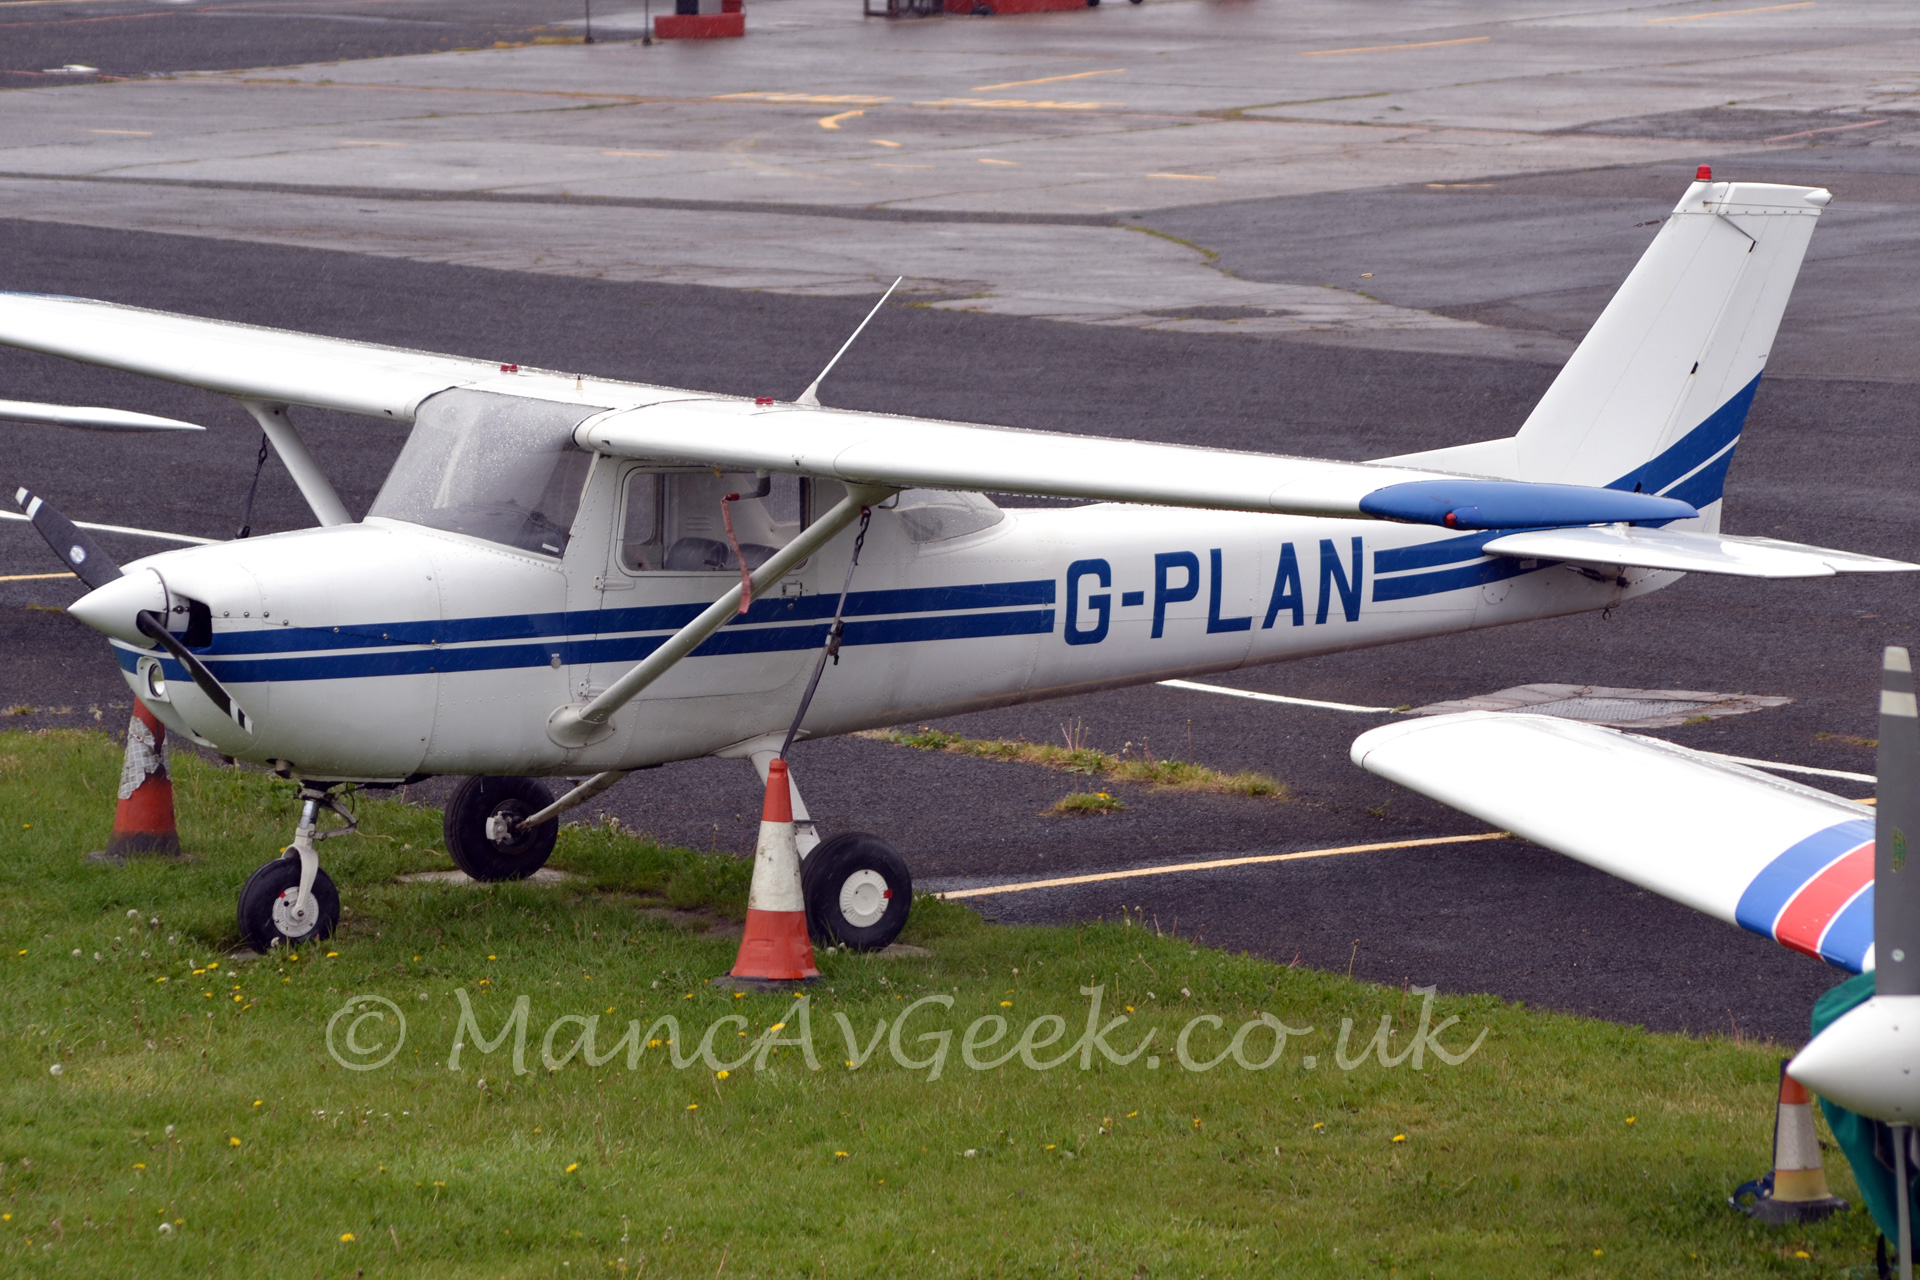 Side view of a single propellor-engined light aircraft parked on grass at the edge of a tarmaced area between a pair of orange and white traffic cones. The plane is mostly white, with a pair of blue stripes running back along the fuselage from the nose, with the registration "G-PLAN" on the rear fuselage. There is the wing and engine of another light aircraft just peeking in to view on the lower right of the frame.